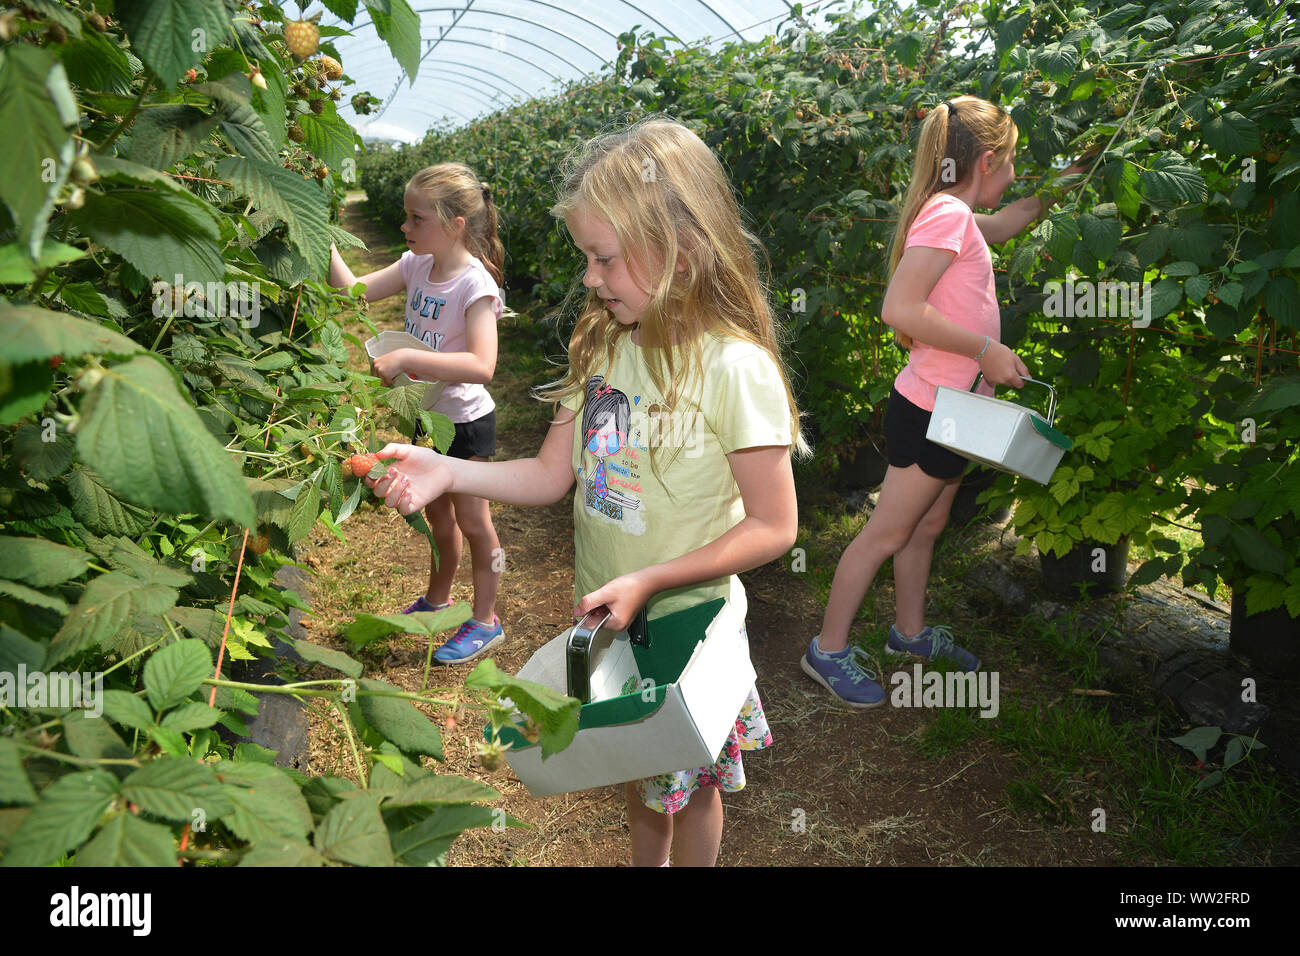 Young girls pick raspberries and other fruits during a visit to a fruit farm near Edinburgh, Scotland Stock Photo